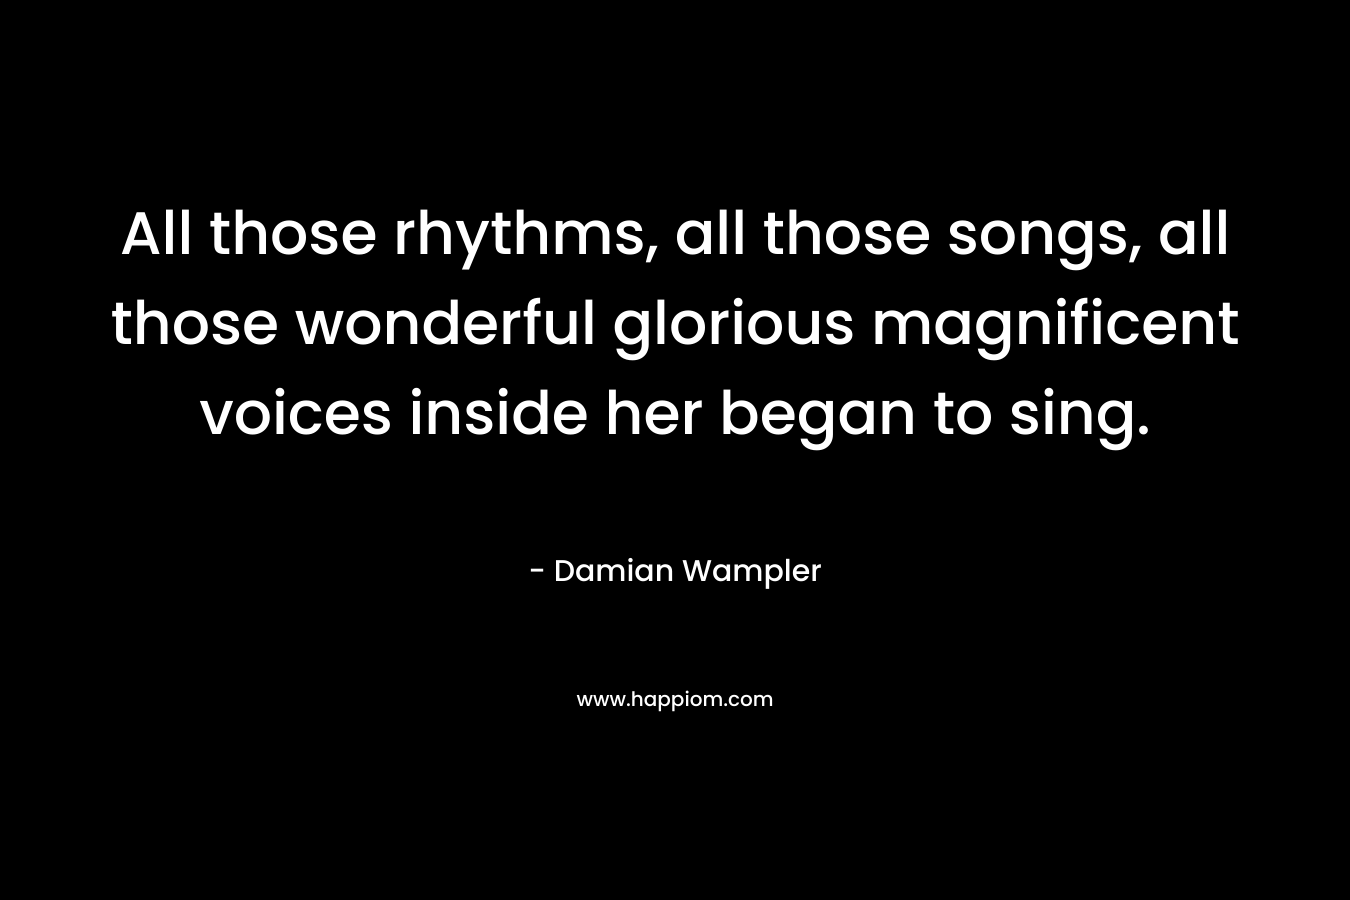 All those rhythms, all those songs, all those wonderful glorious magnificent voices inside her began to sing. – Damian Wampler